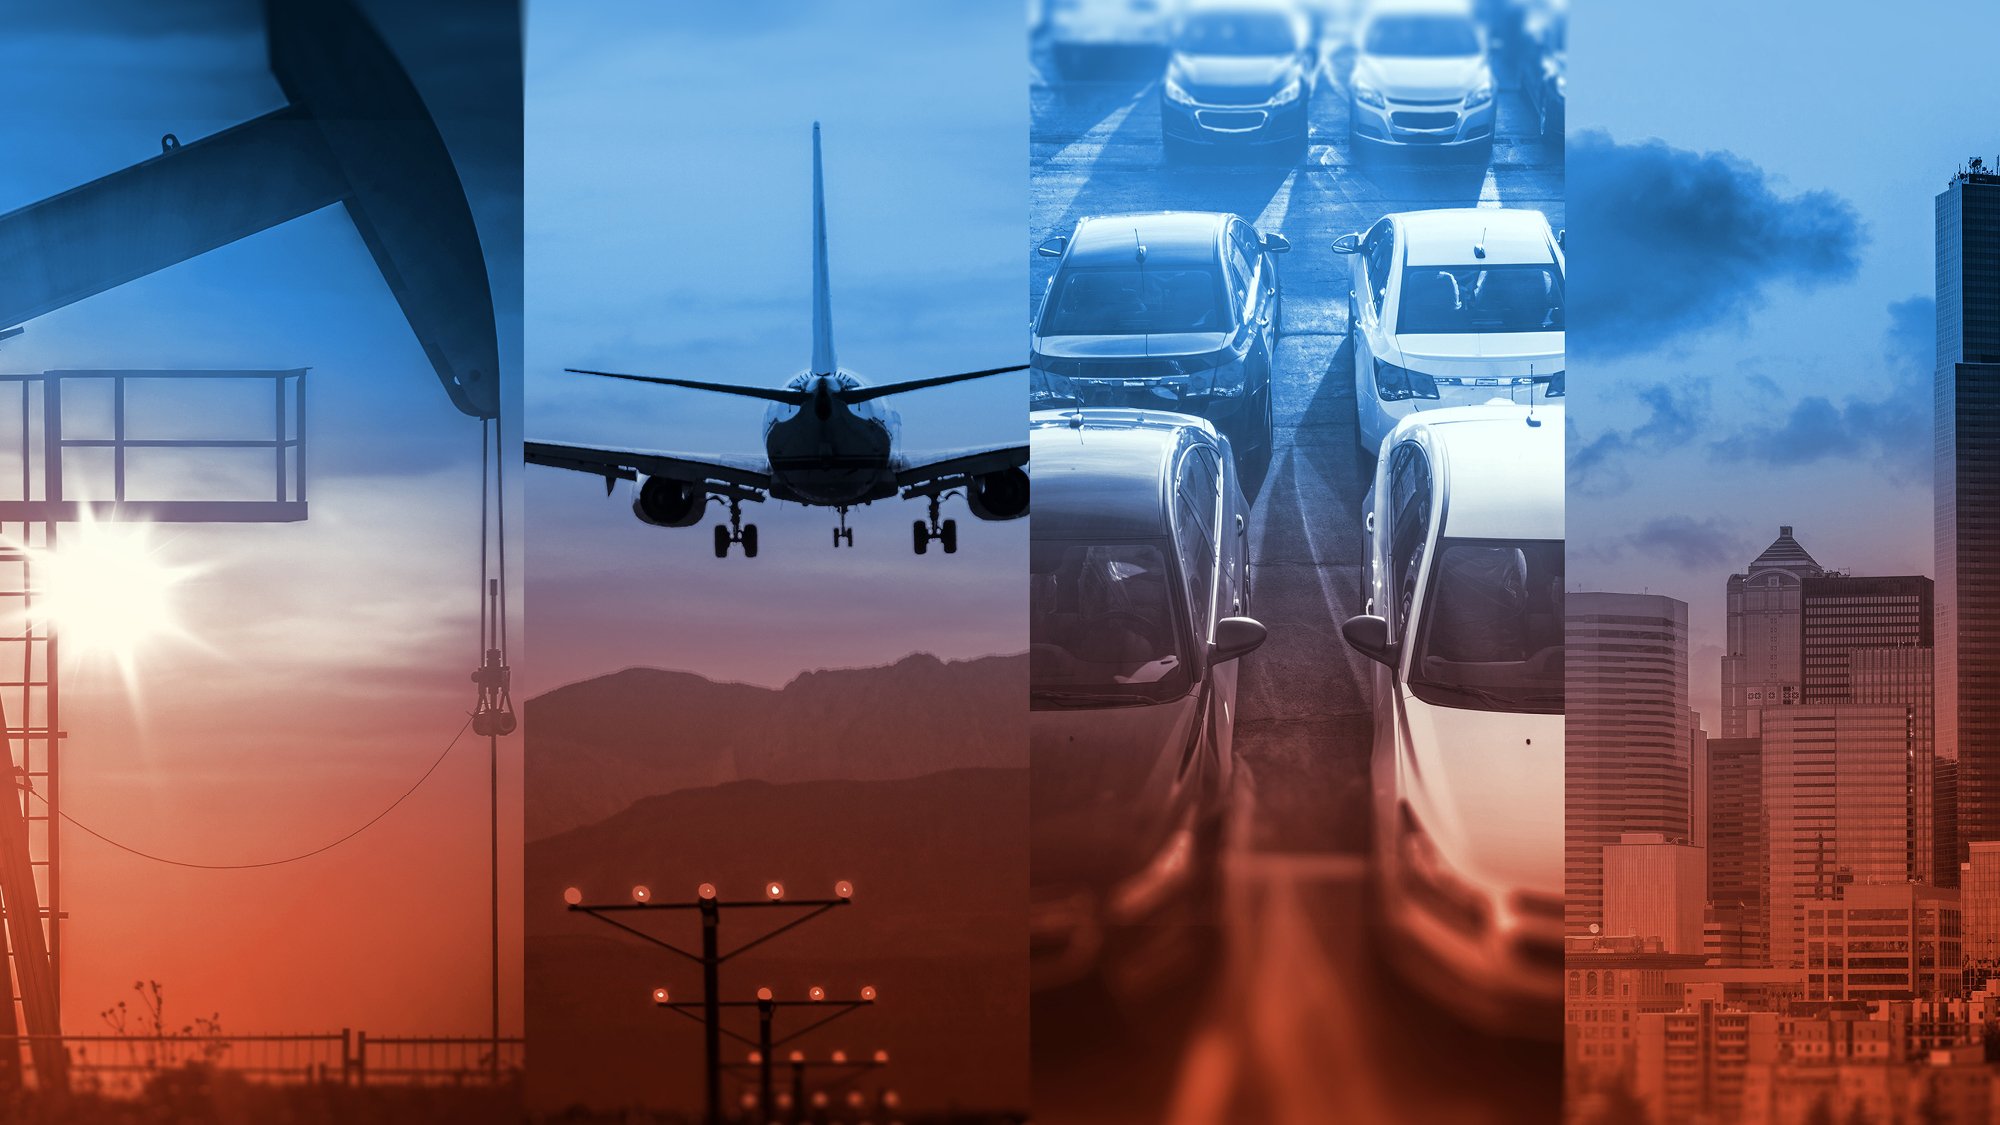 Collage of photographs of cars on road, plane over power lines, city skyline